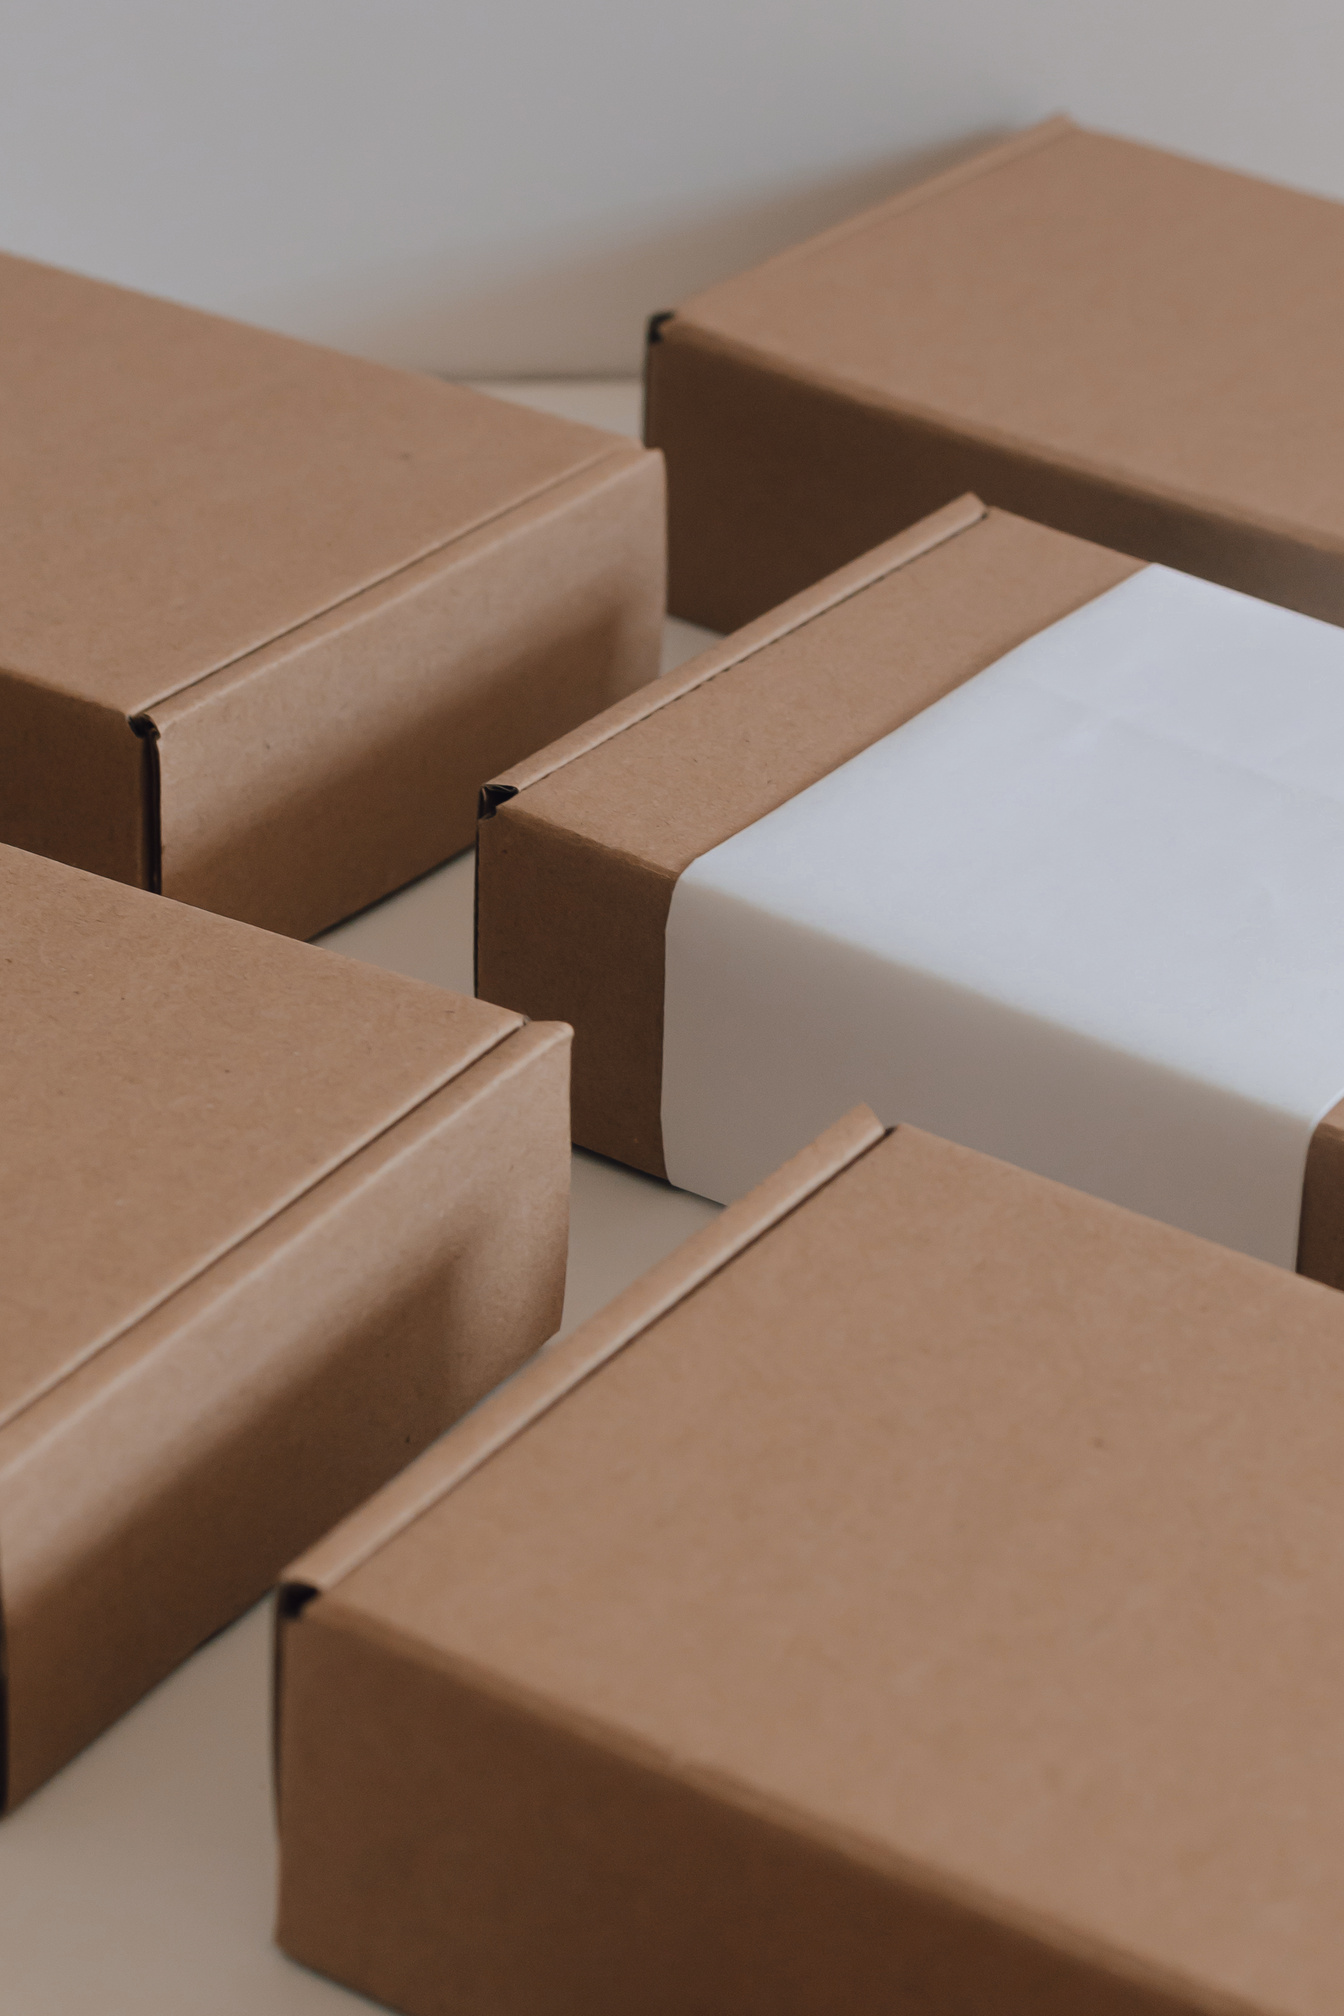 Brown Cardboard Boxes for Packaging